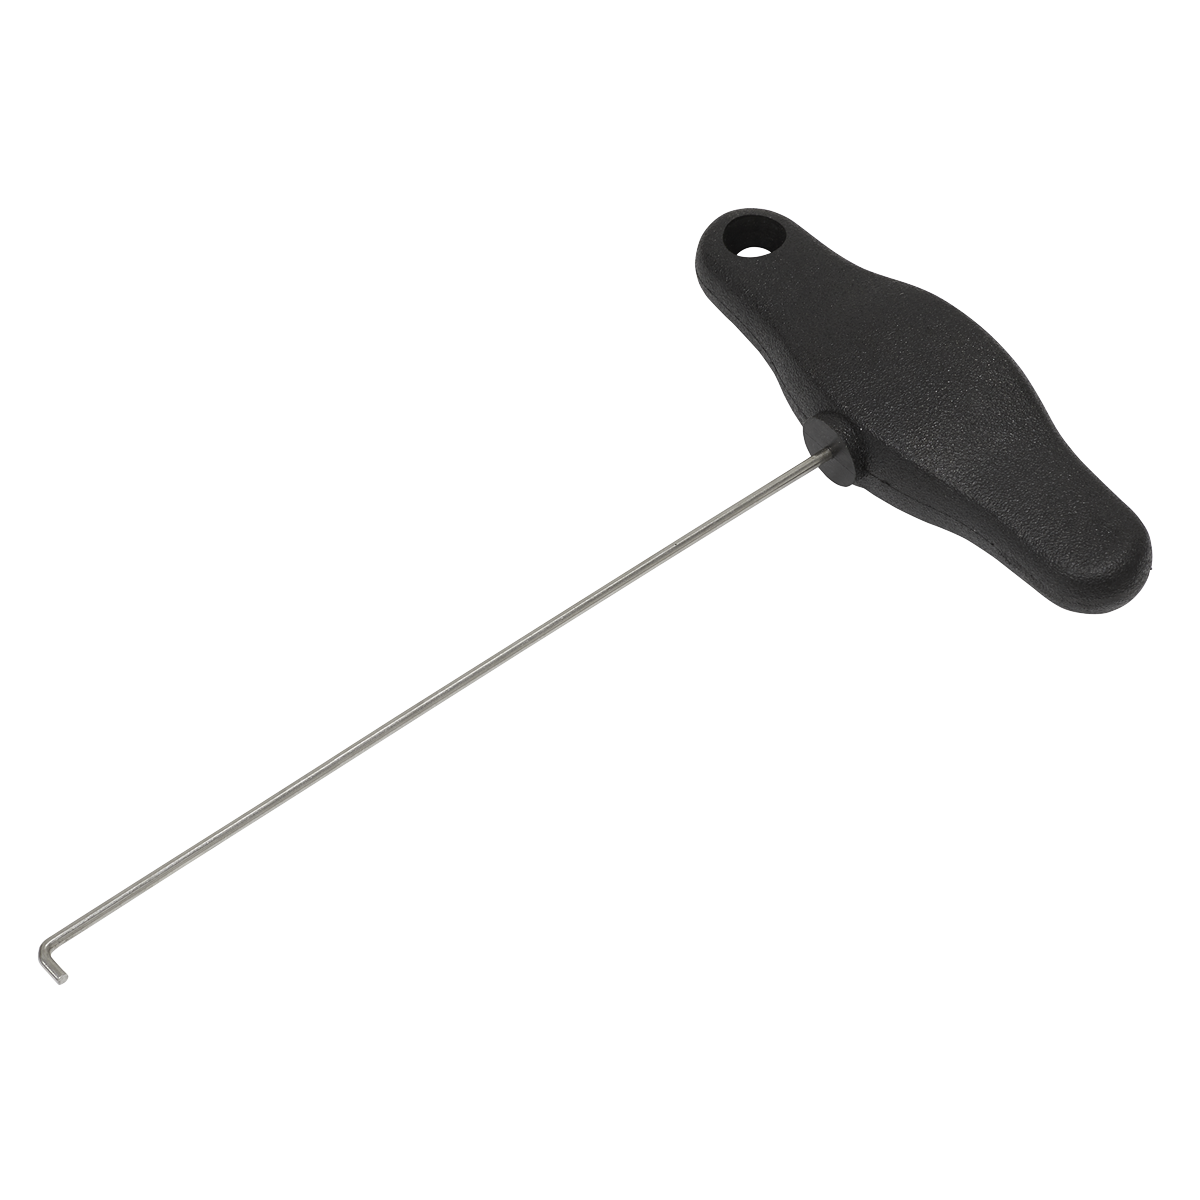 Sealey VS5212 Airbag Removal Tool - Land Rover